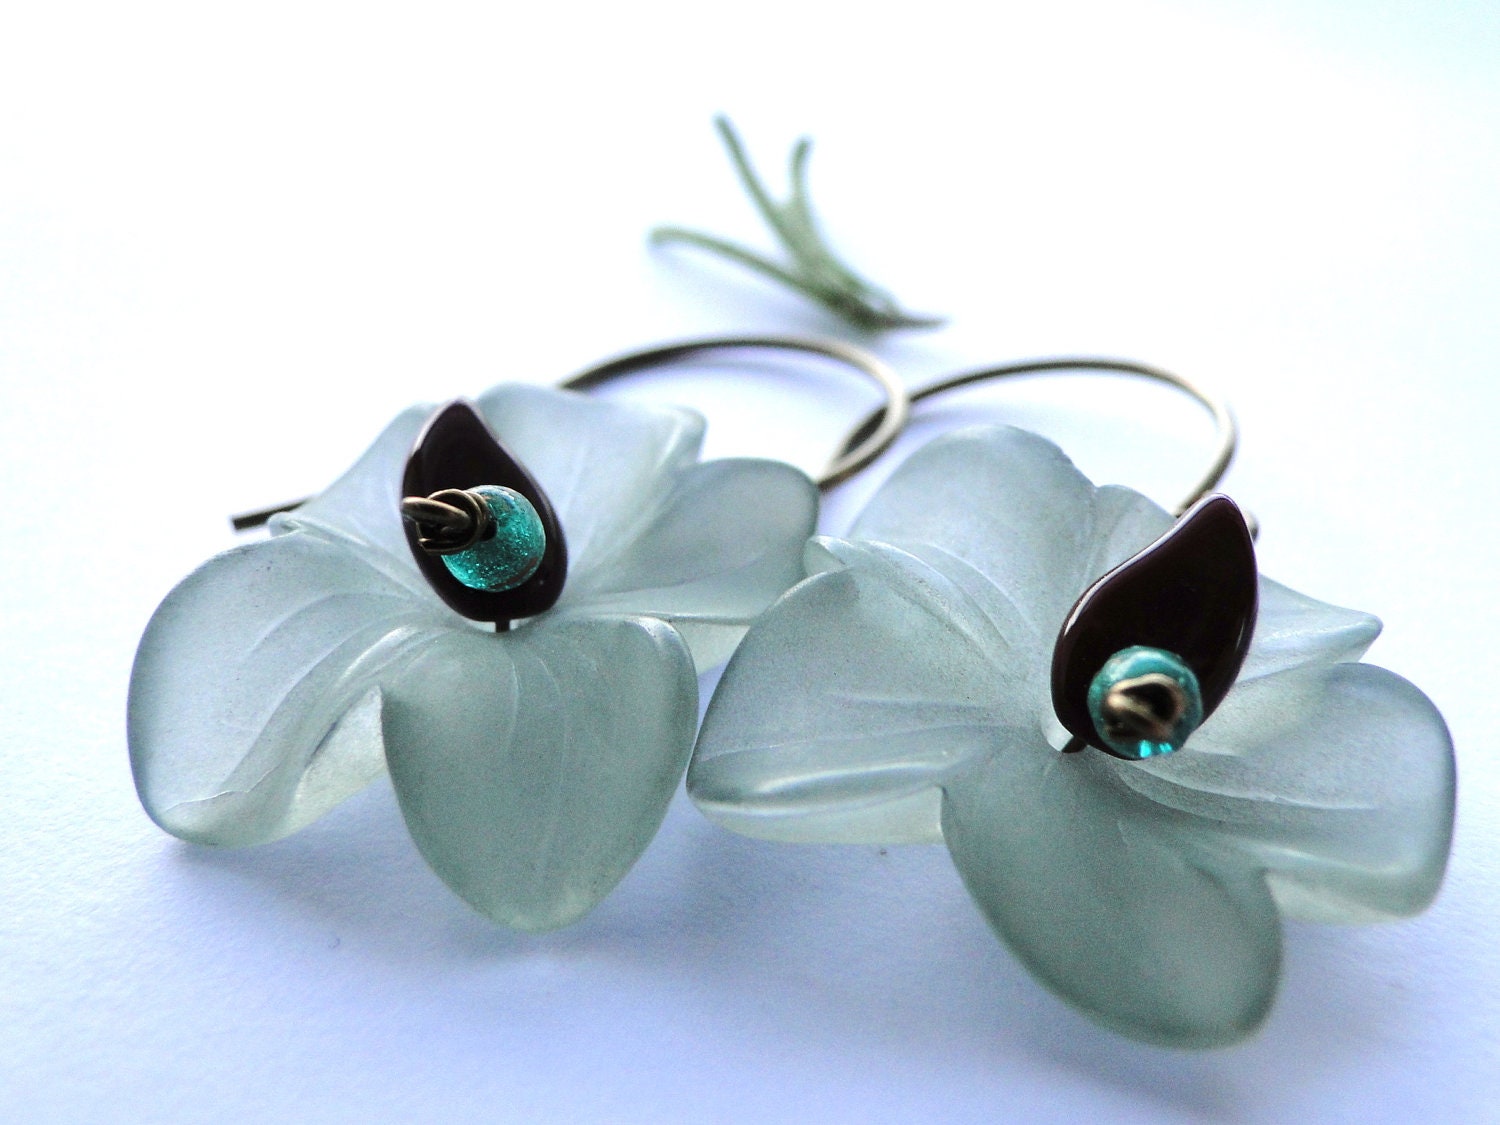 New - The Prettiest Thing I Ever Did See, Earrings, Flowers, Vintage Lucite, Accessories, Fall Rustic Earrings - wulfgirl